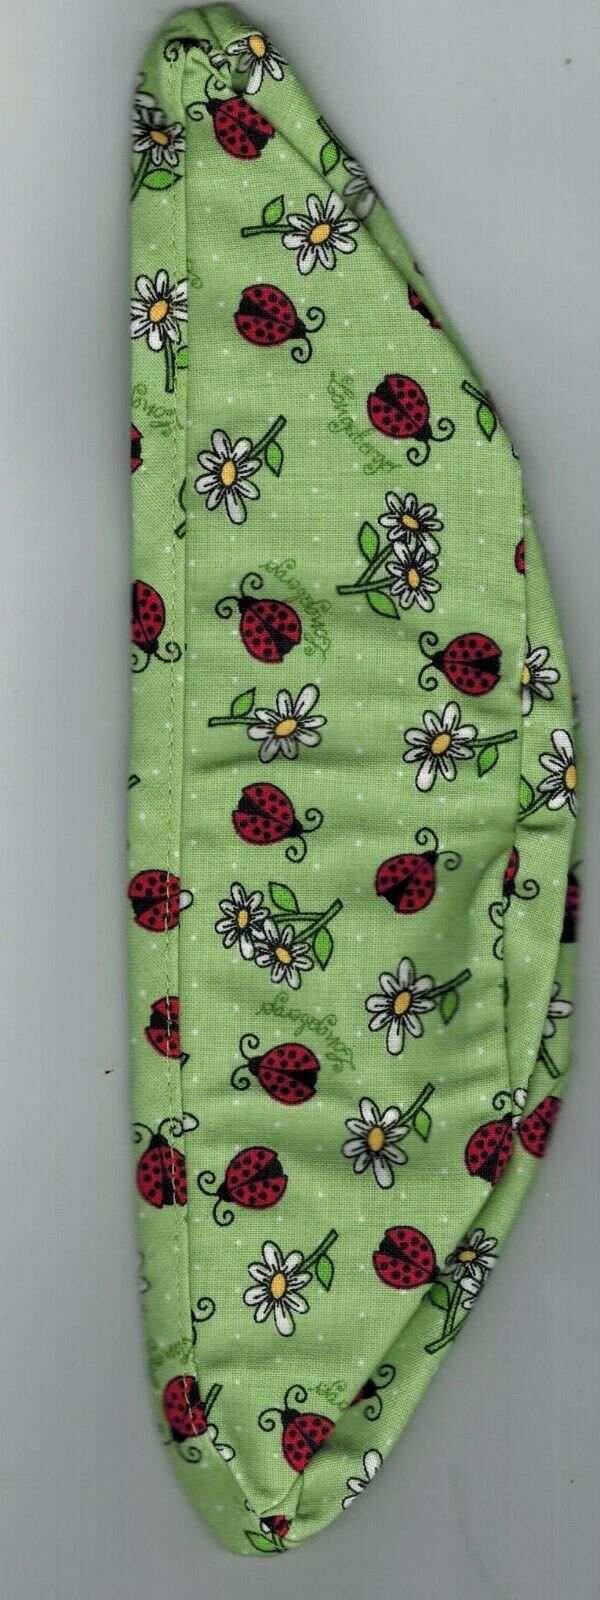 Longaberger Button Liner - Homestead Ladybug Fabric - Drop In